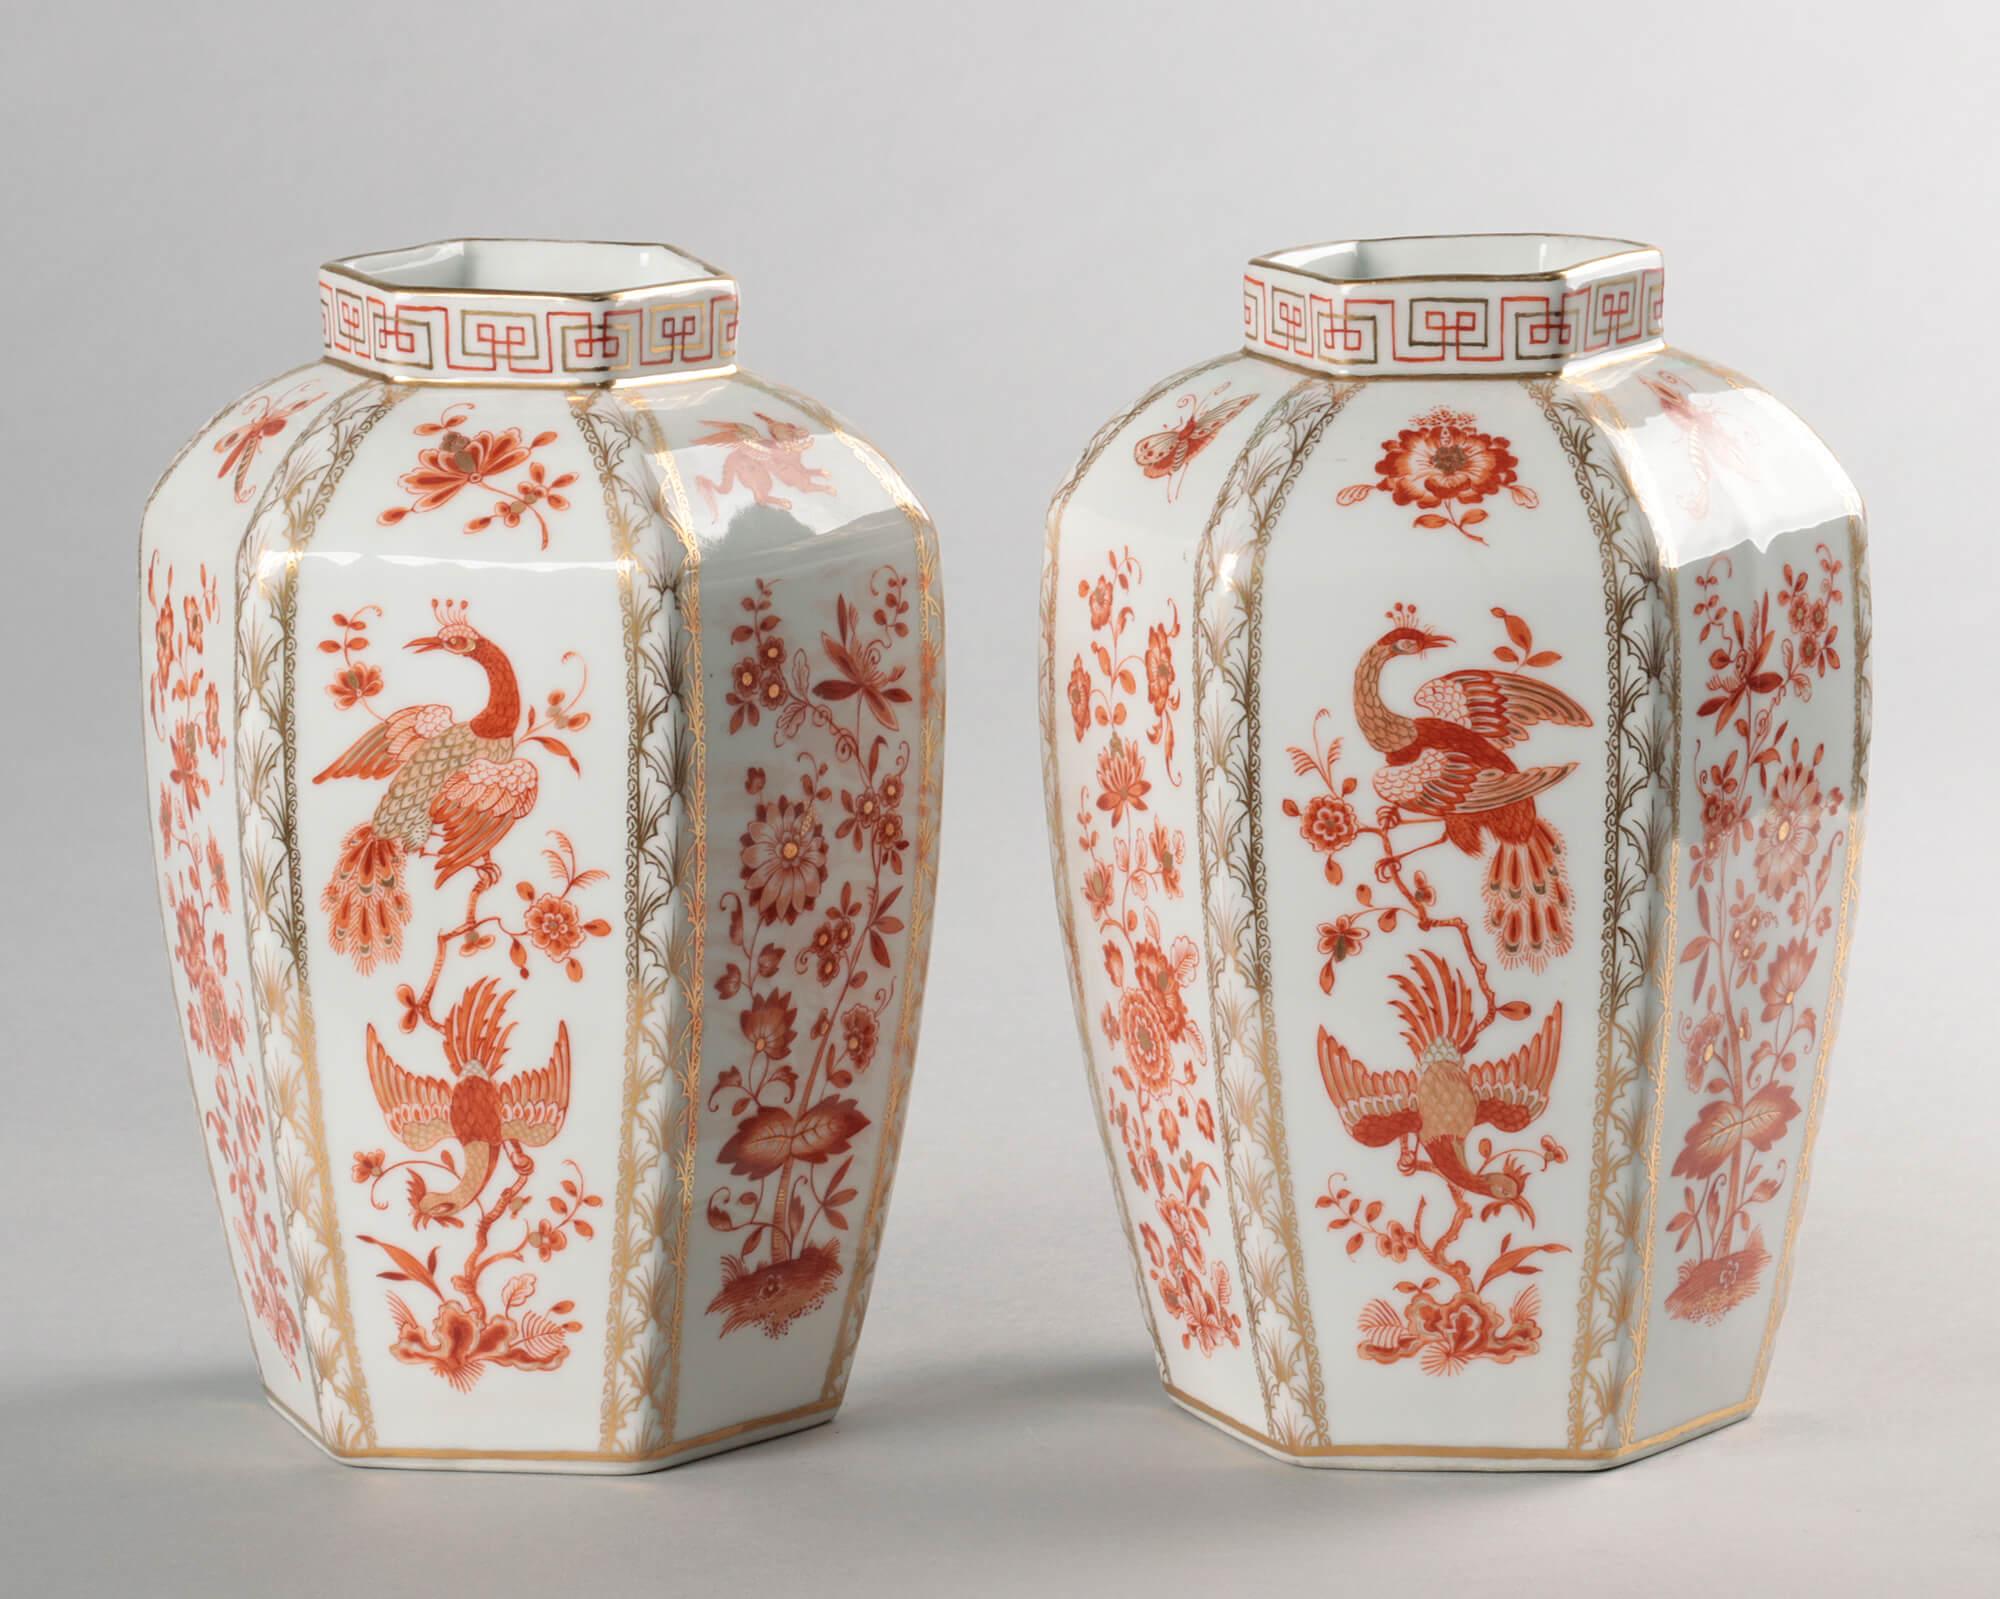 Two beautiful antique porcelain vases from the 19th century by Helena Wolfsohn. The vases are made of white porcelain and decorated with geometric motifs, birds, butterflies, flowers and gold accents. The vases are marked on the bottom